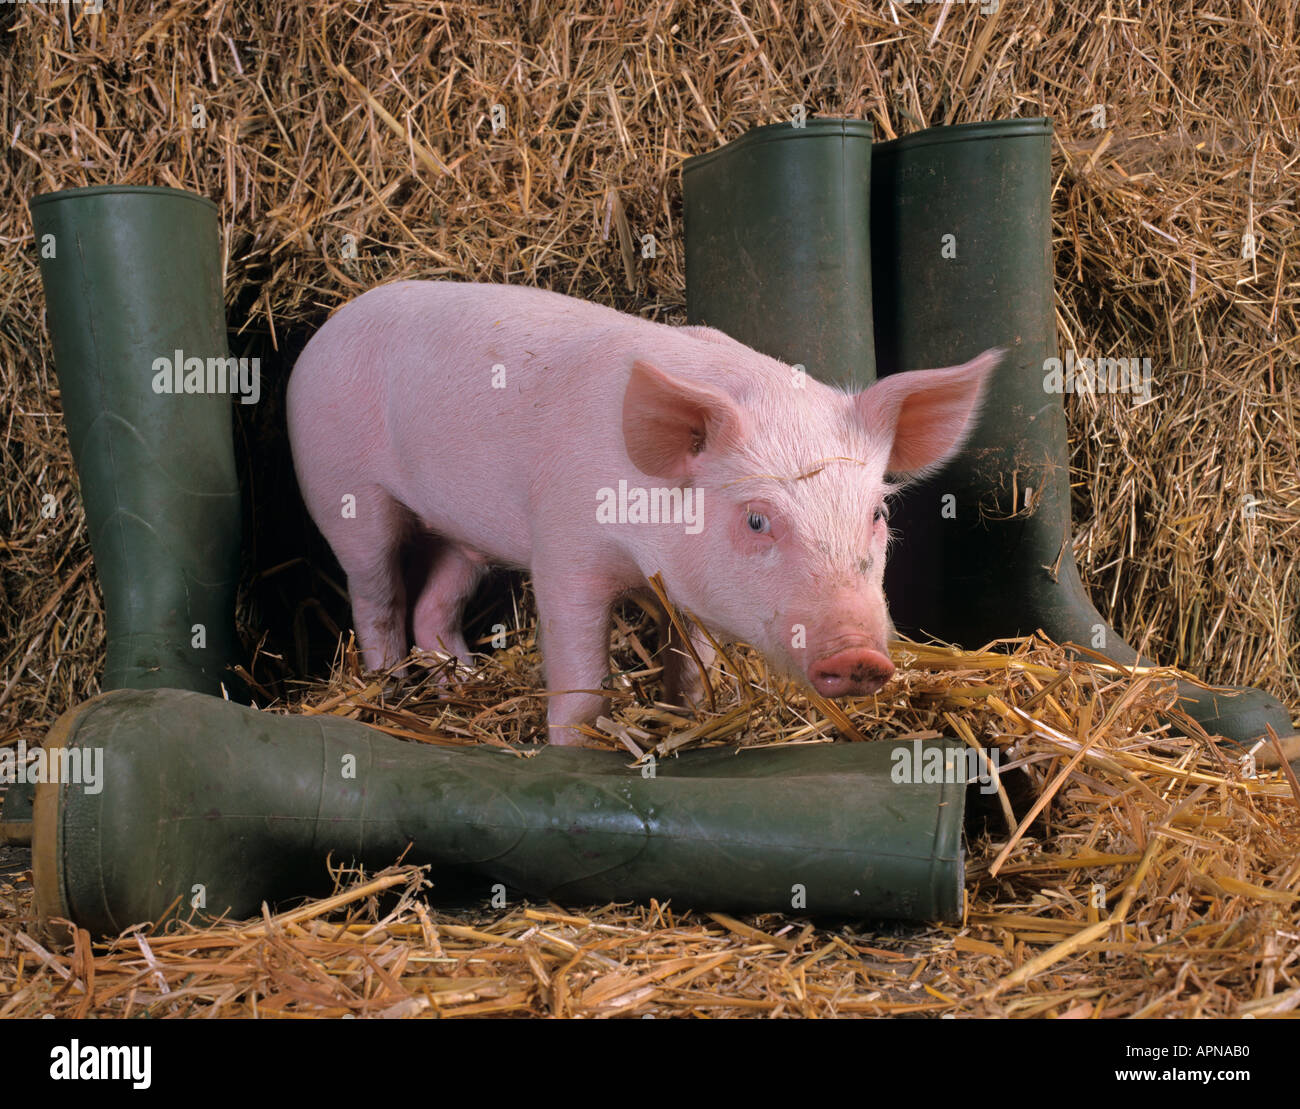 Large White Piglet Green Wellies Stock Photo